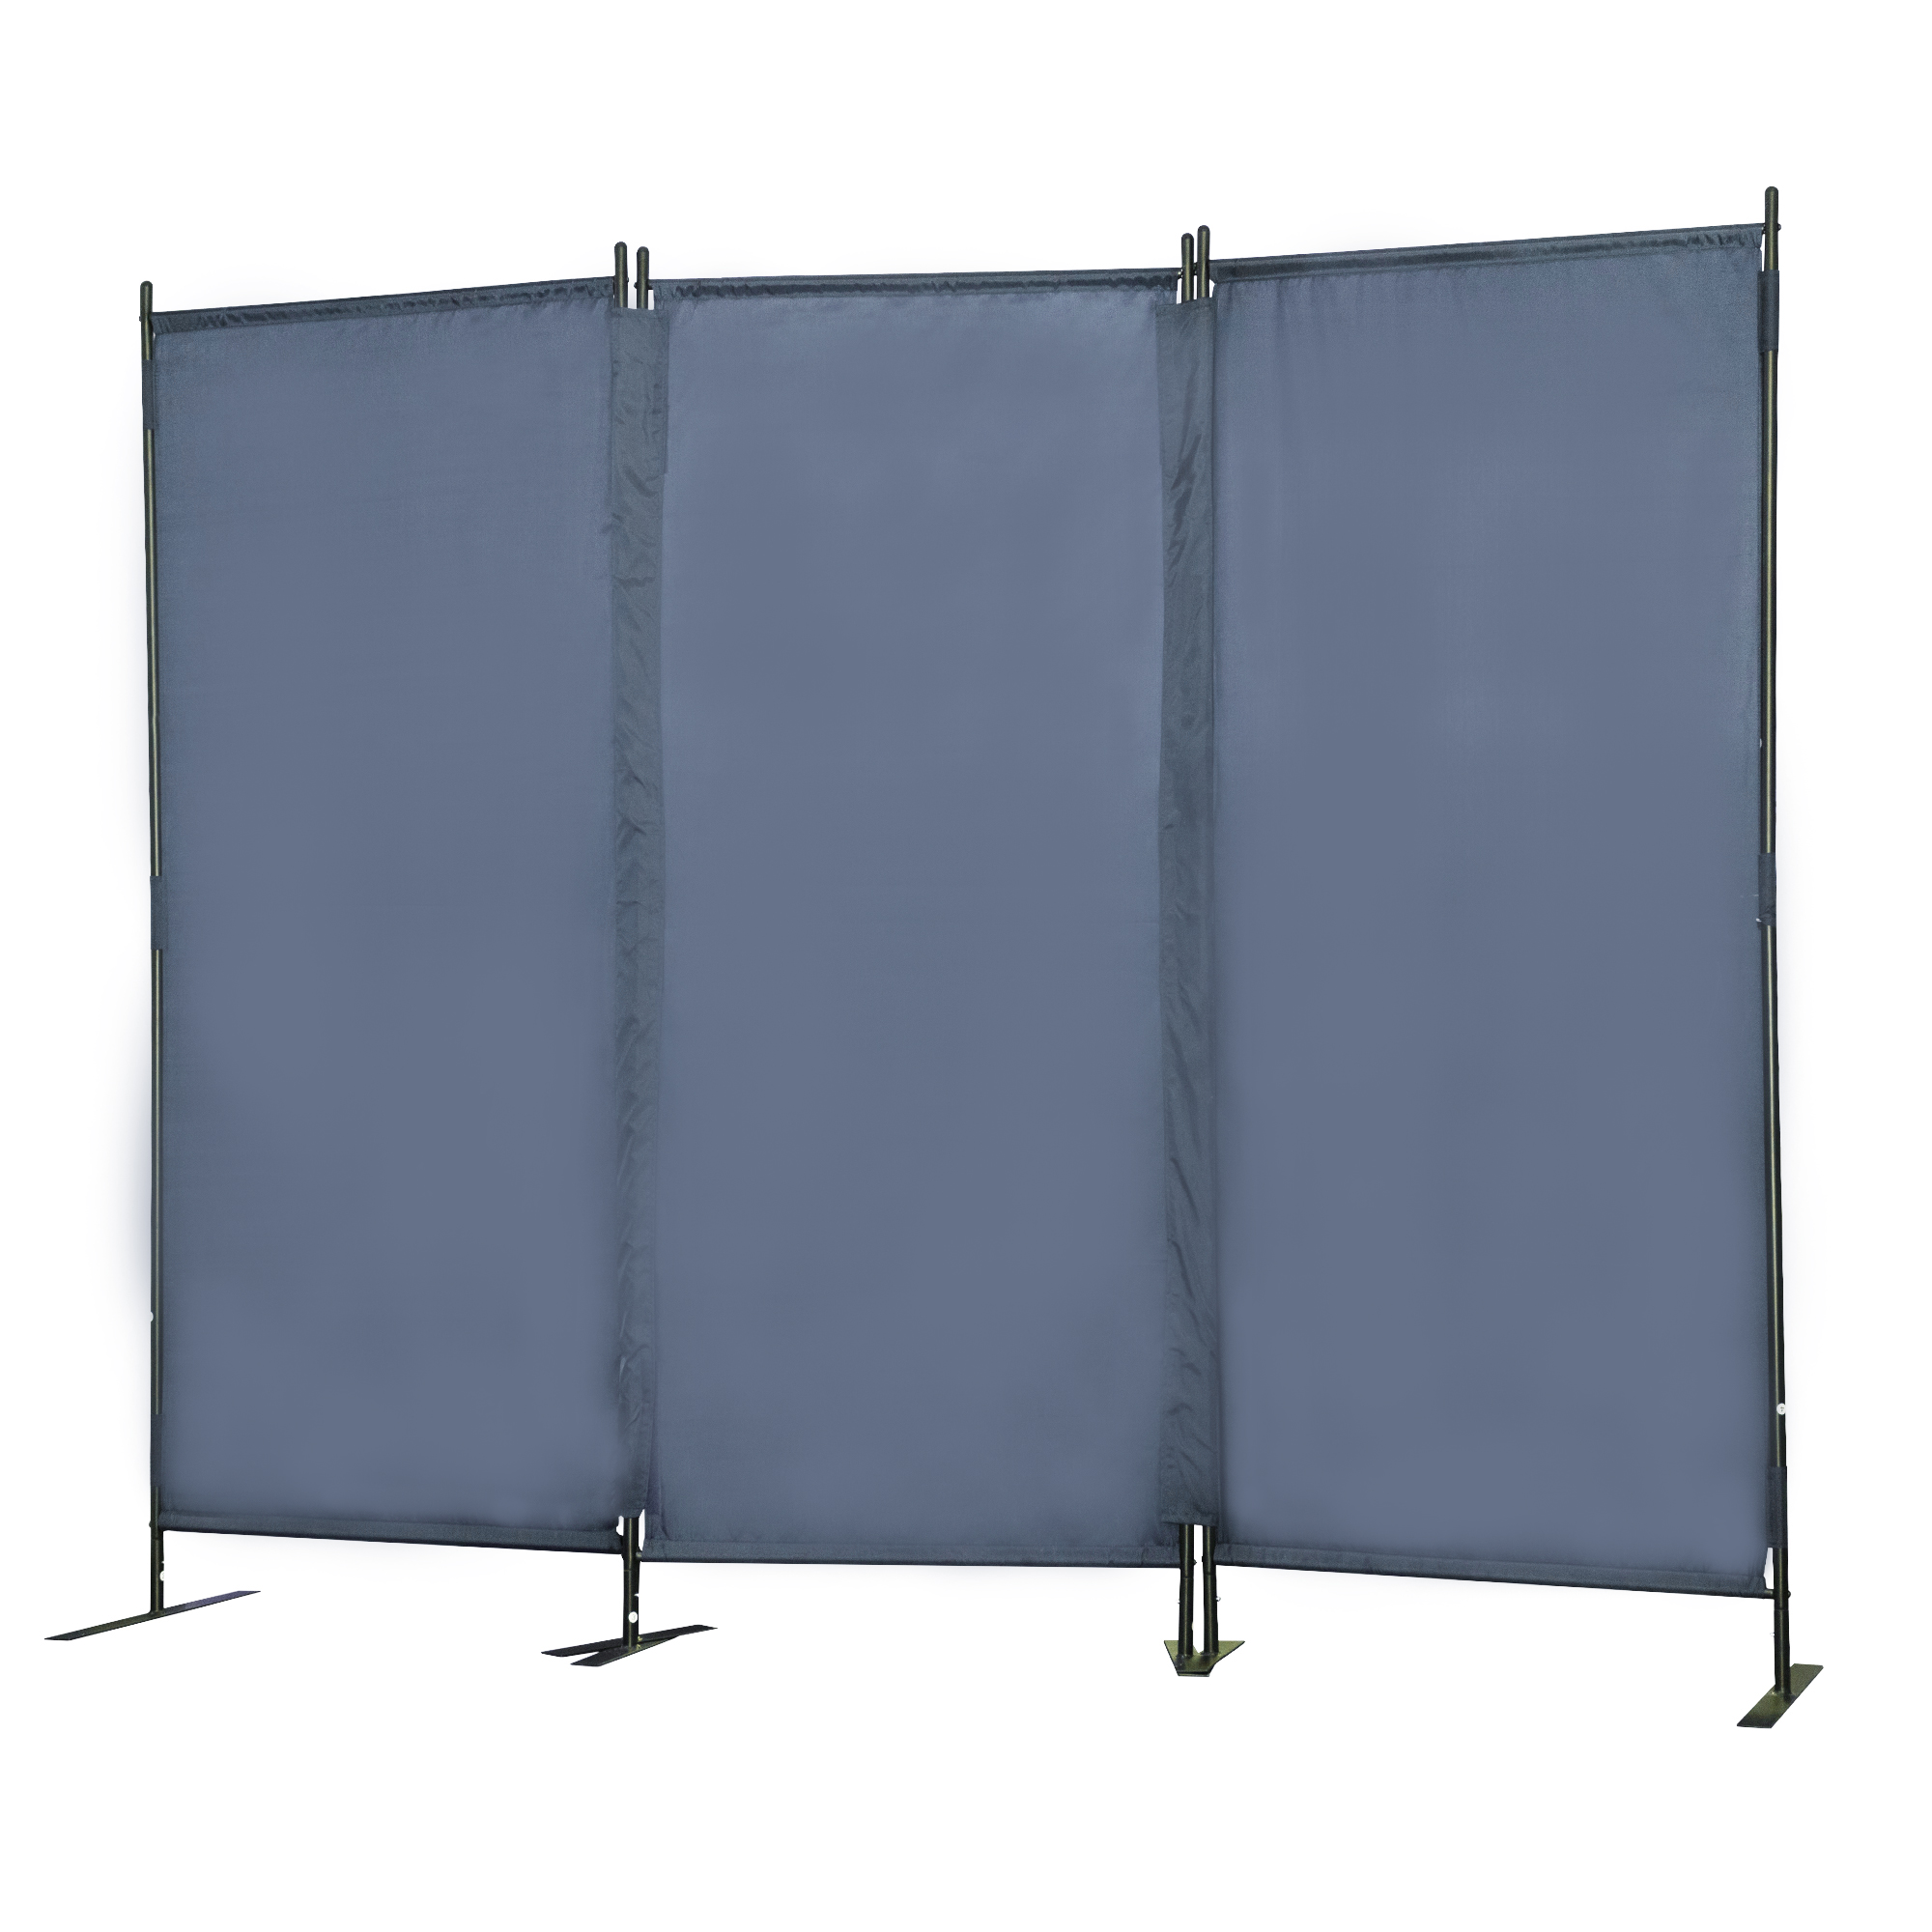 JAXPETY Room Divider Folding Privacy Screen w/3 Fabric Panels, Metal Standing